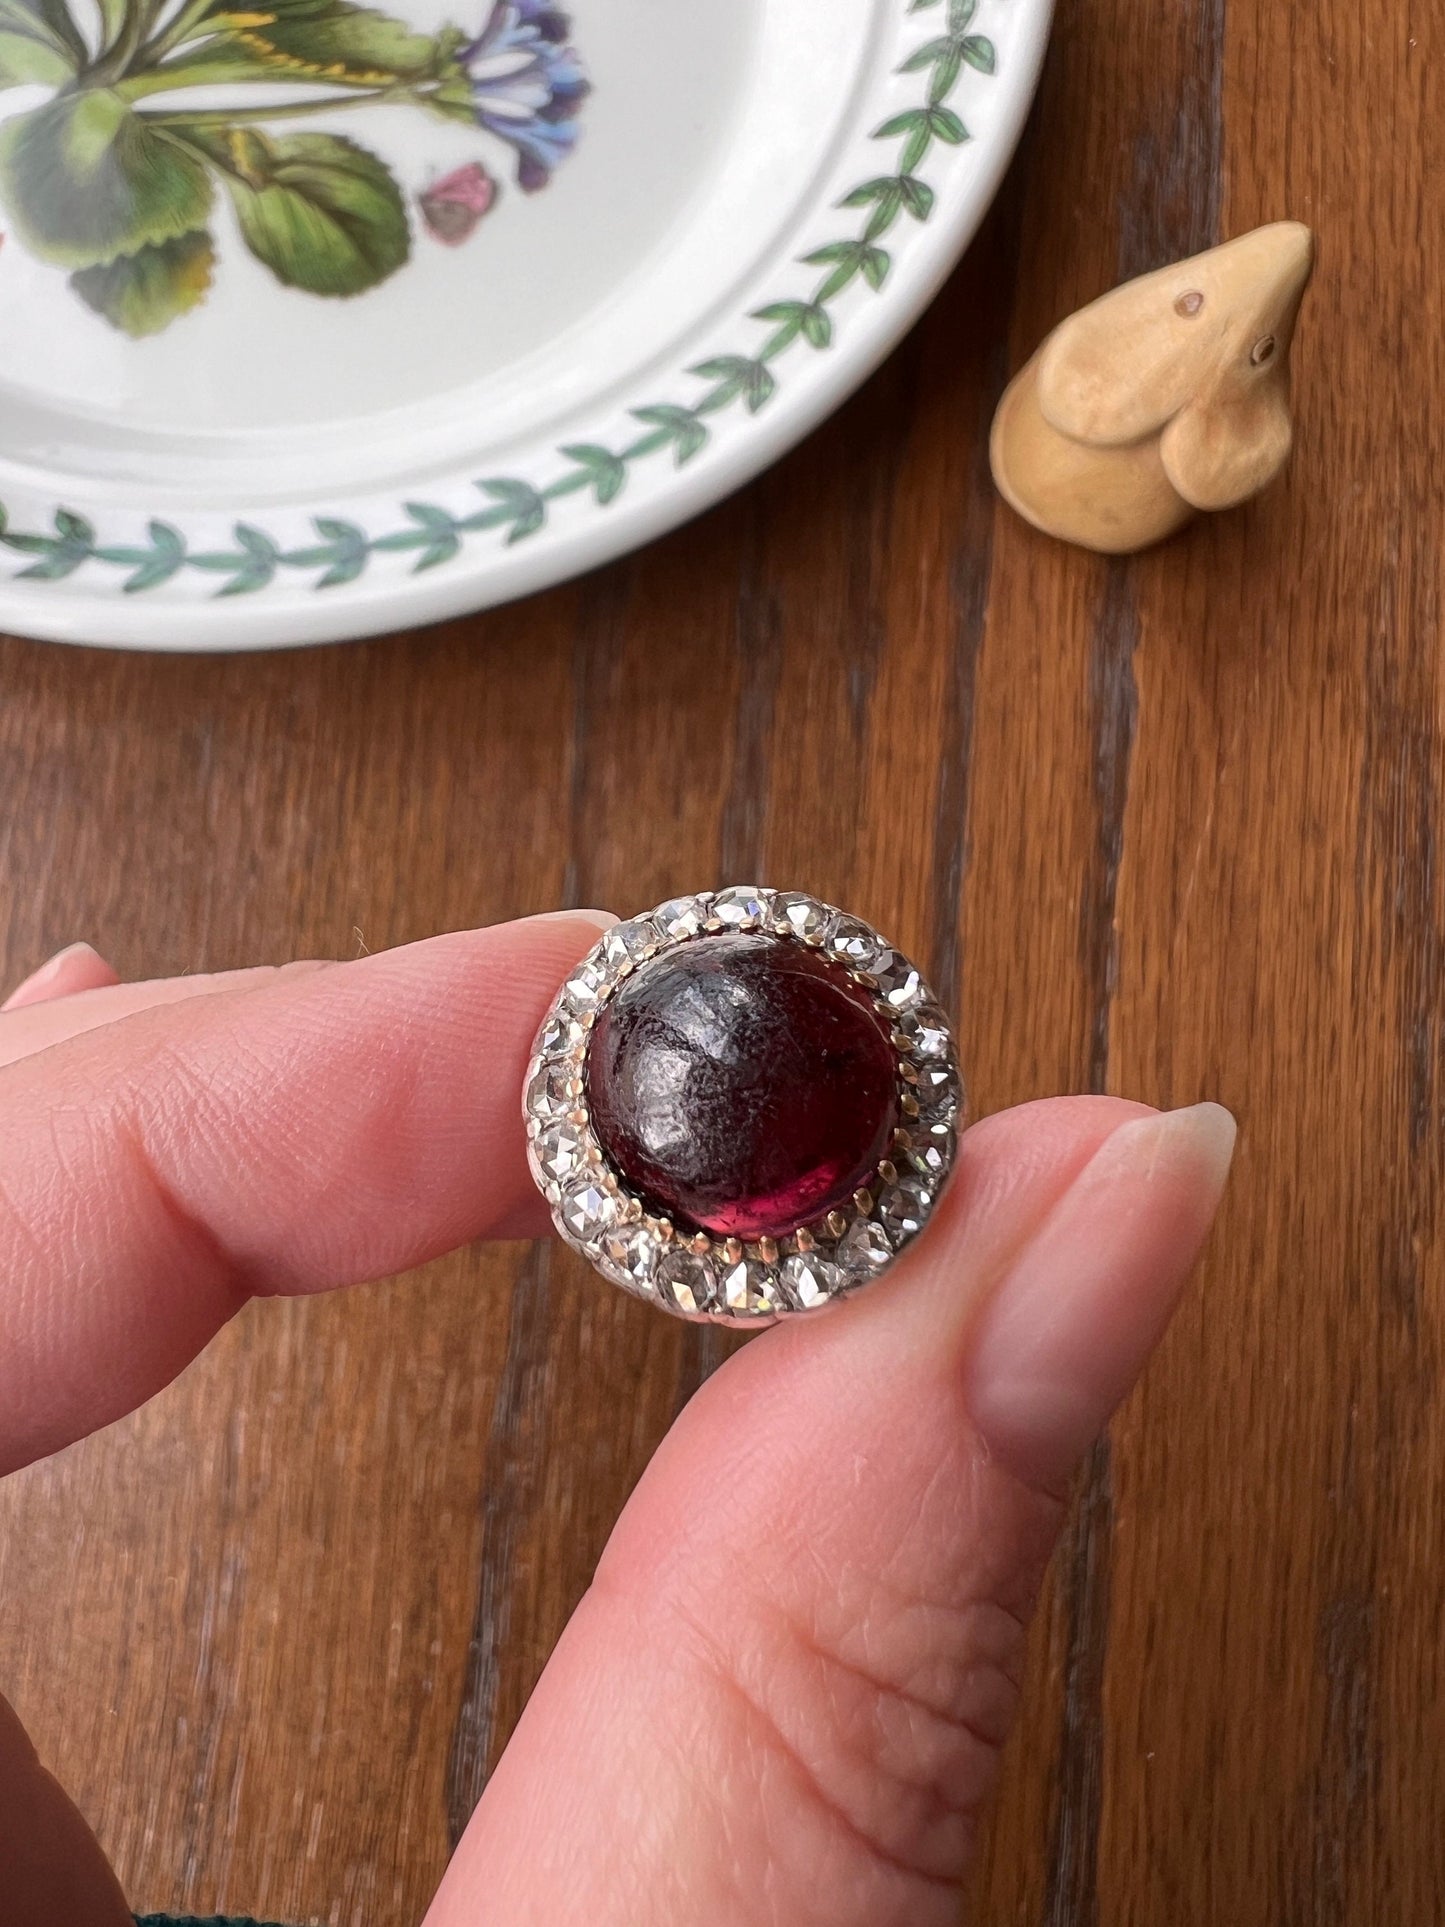 Glowing Cabochon Red GARNET Rose Cut Diamond Halo Ring French Antique 18k Gold Silver Victorian Juicy Crimson Romantic Gift Round Bauble